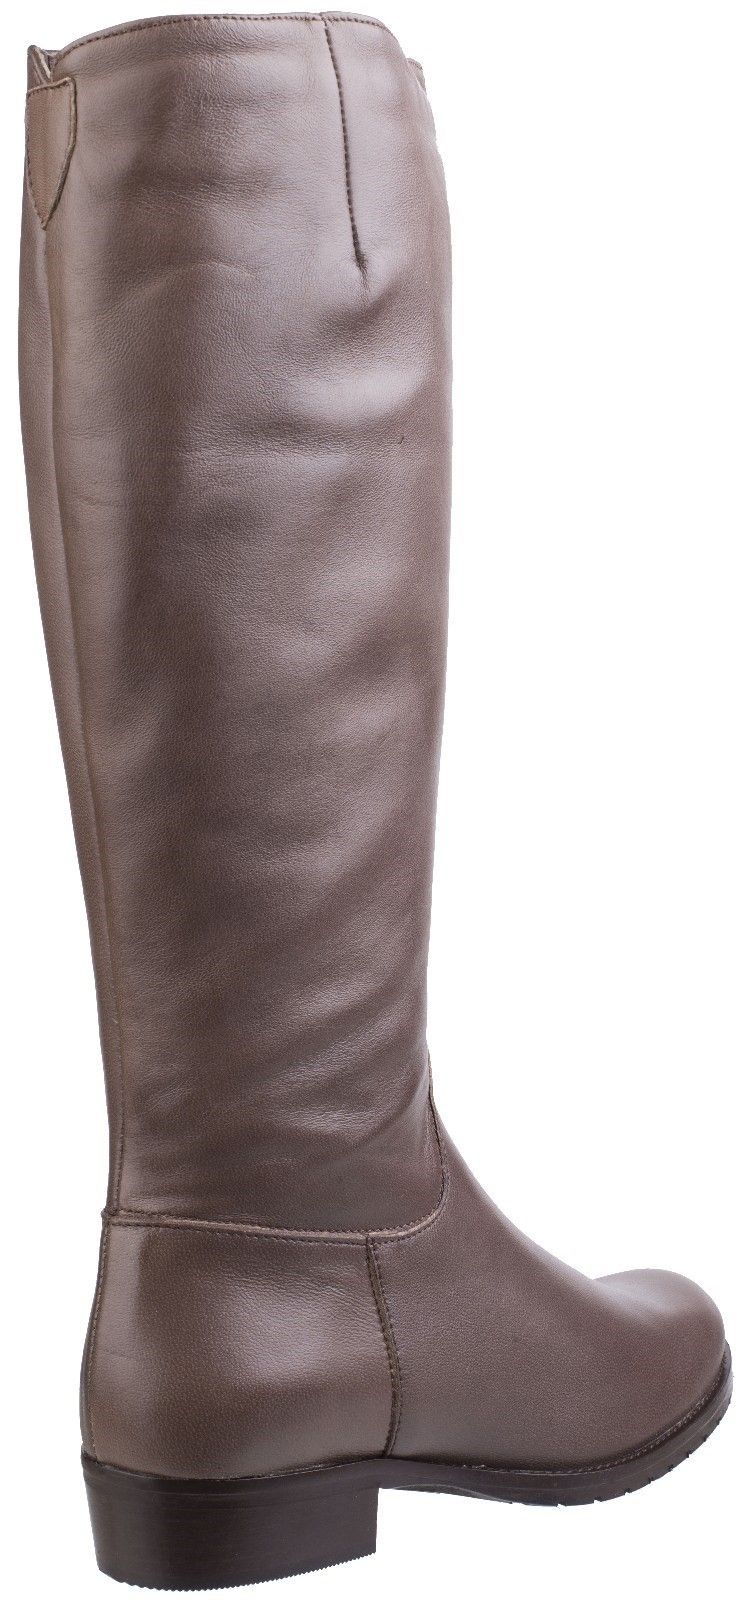 Ladies semi-formal day to night tall boot crafted with a luxury leather upper, side zip and low block heel. Crafted with a smooth full grain leather upper. 
Full inside zip. 
Soft fleece warm lining. 
Shaped heel stiffener and contoured fitted back. 
Hidden elasticated calf panel offers additional fitting.